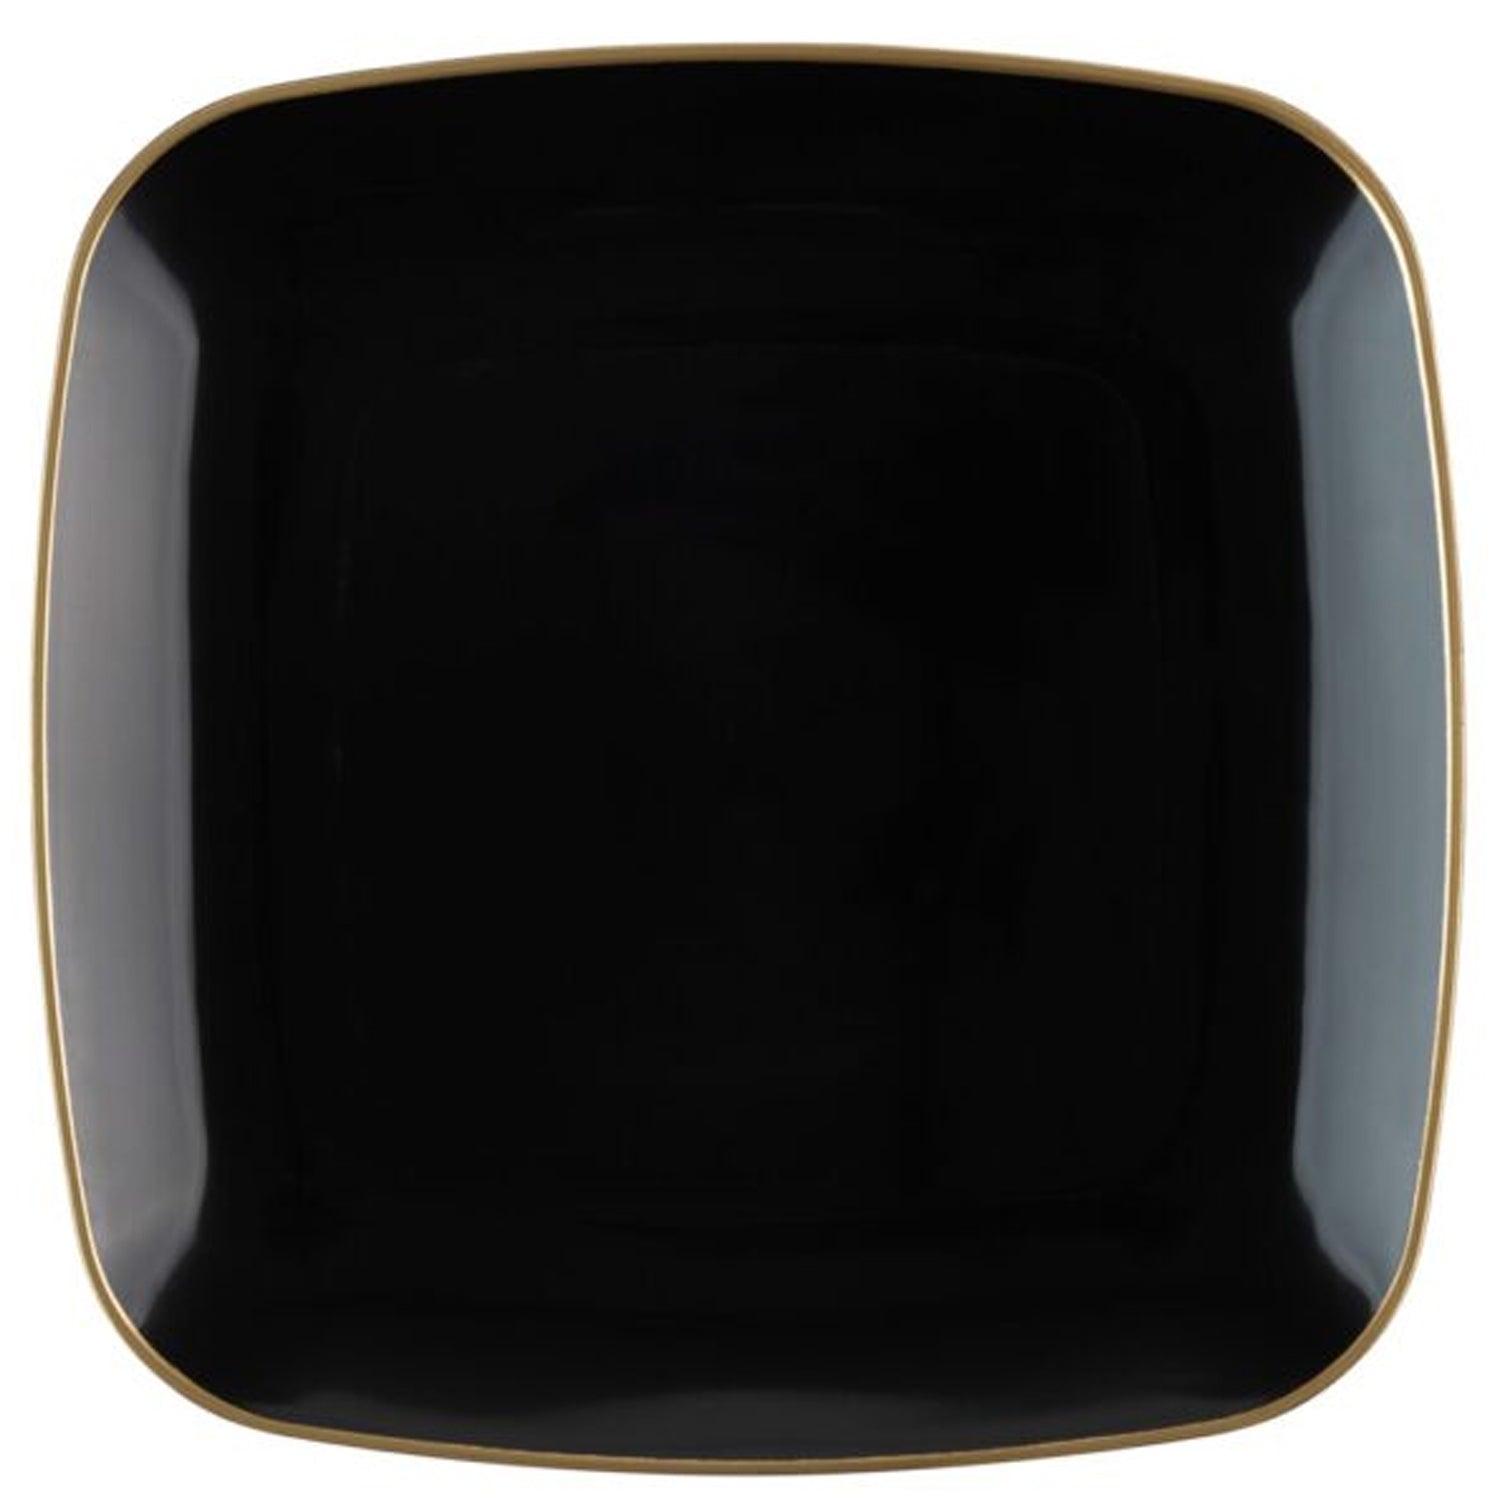 Organic Collection Black and Gold Rim Square Dinner Plates 10" Tablesettings Blue Sky 10 Pieces  